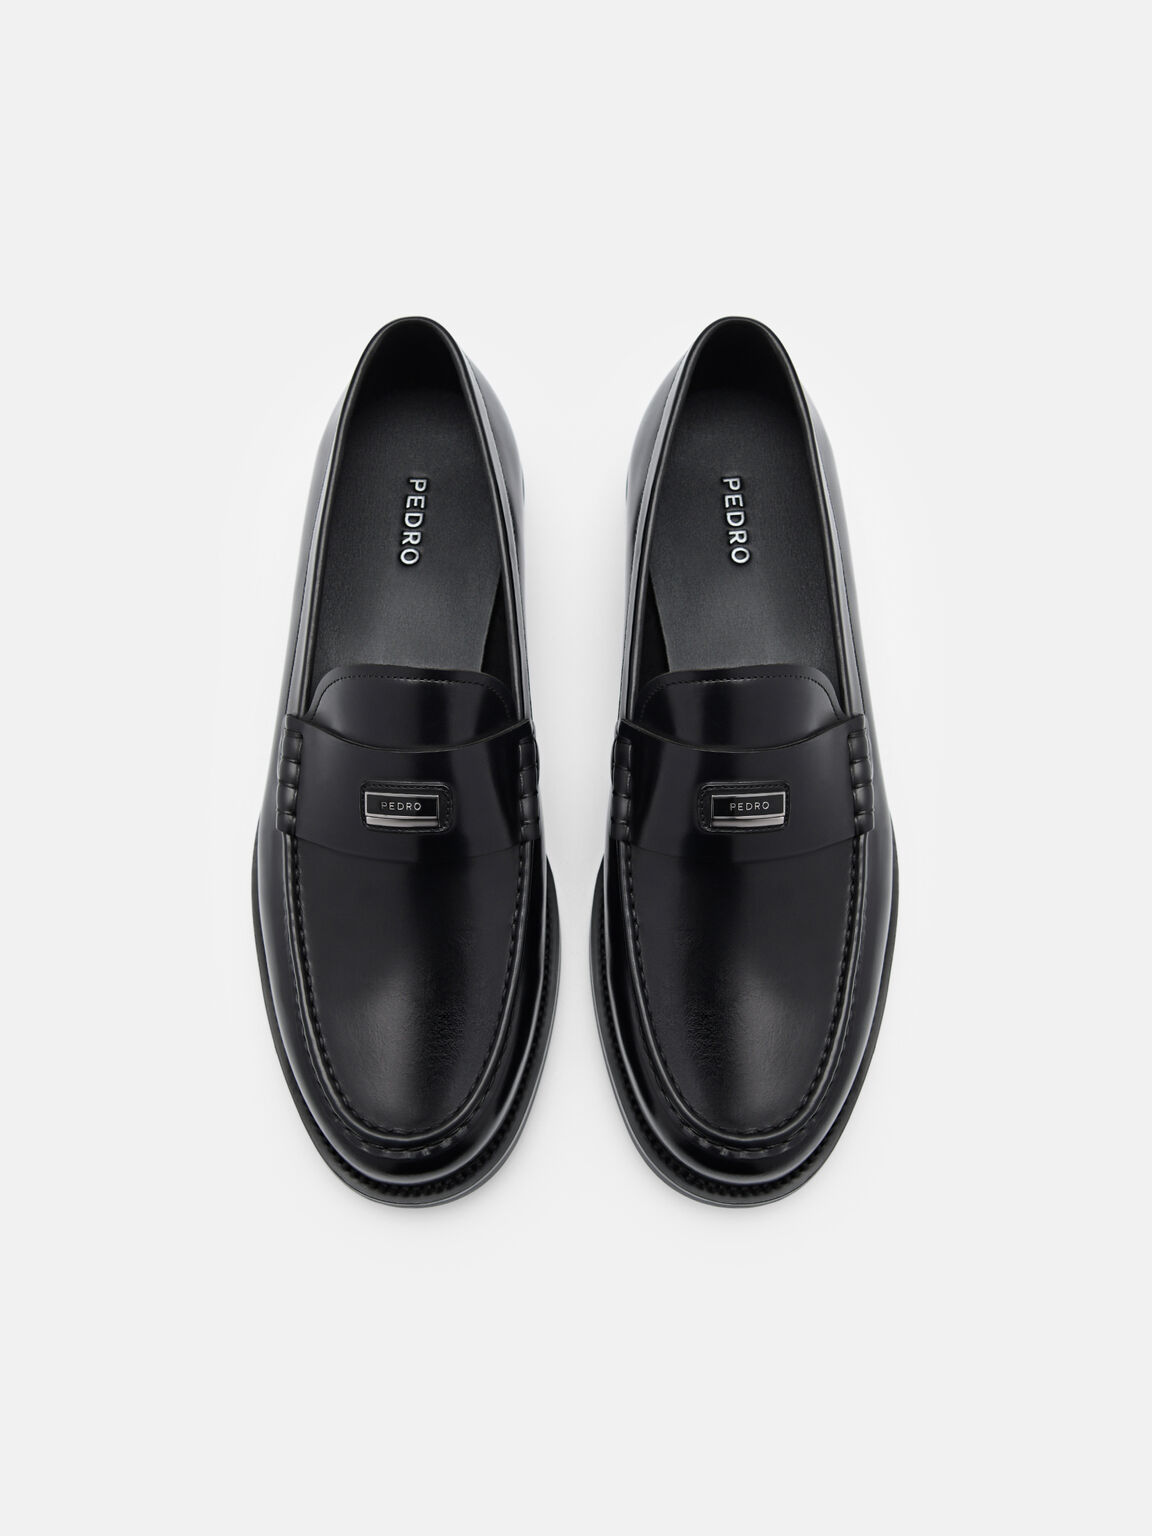 Black Leather Loafers - PEDRO SG